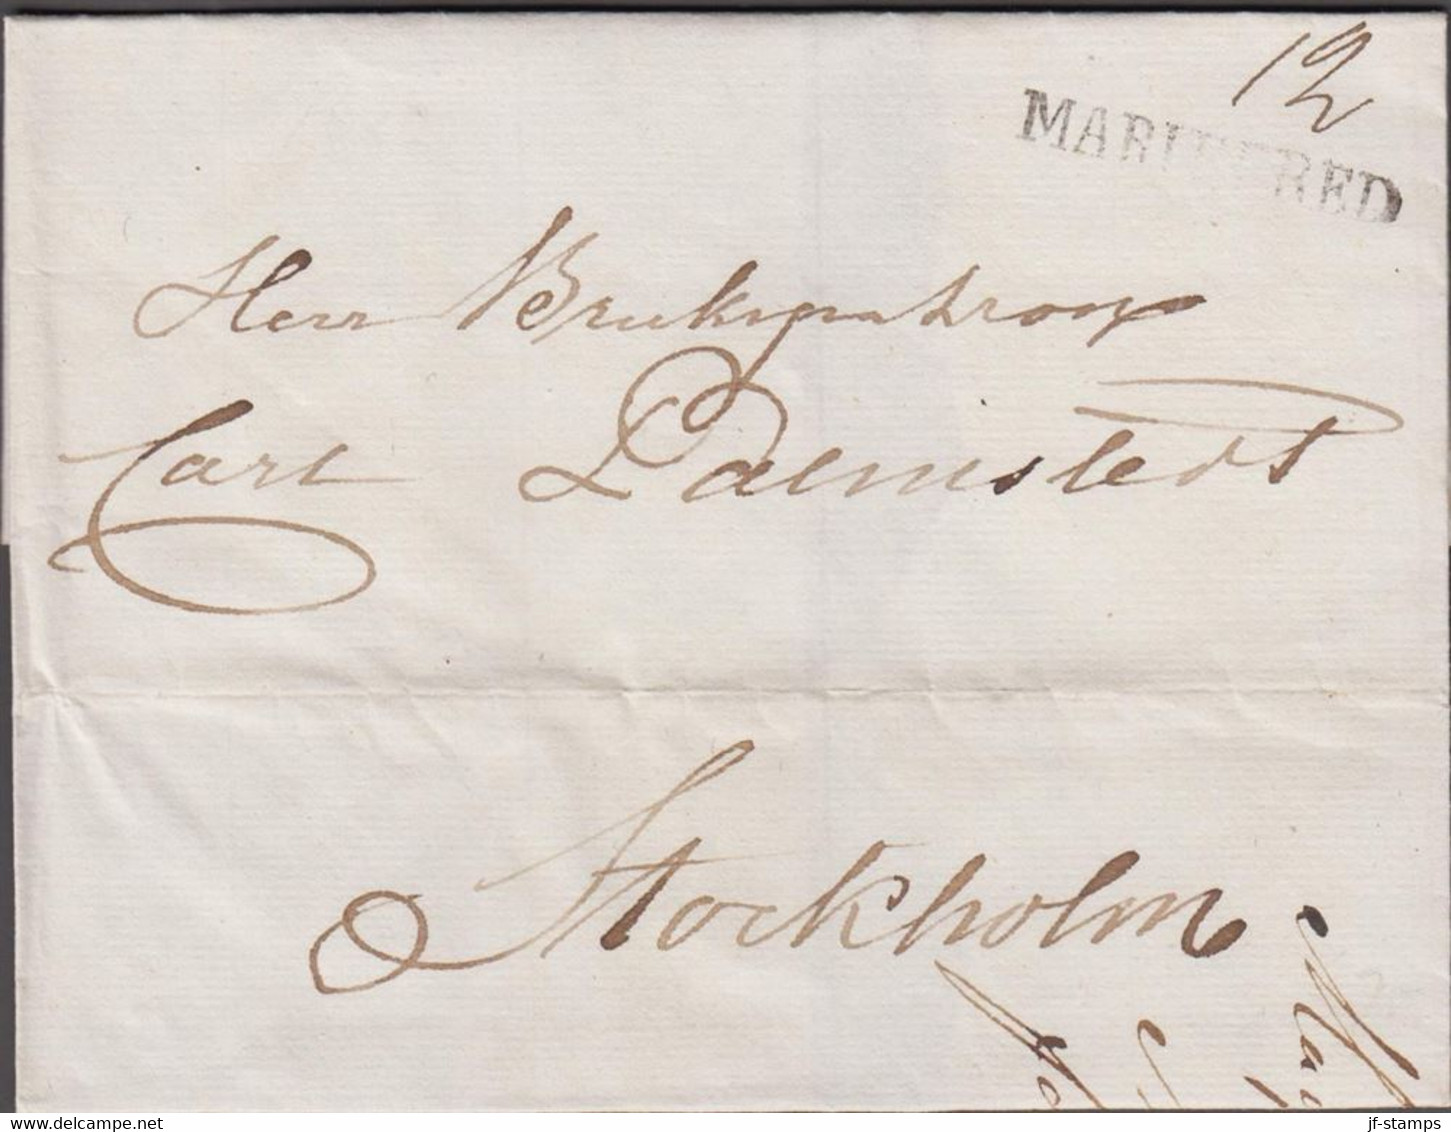 1827. SVERIGE. MARIEFRED  On Cover To Stockholm.  Dated Gripsholm 1. May 1827. Almost 200 Years Ago.  - JF524326 - ... - 1855 Vorphilatelie